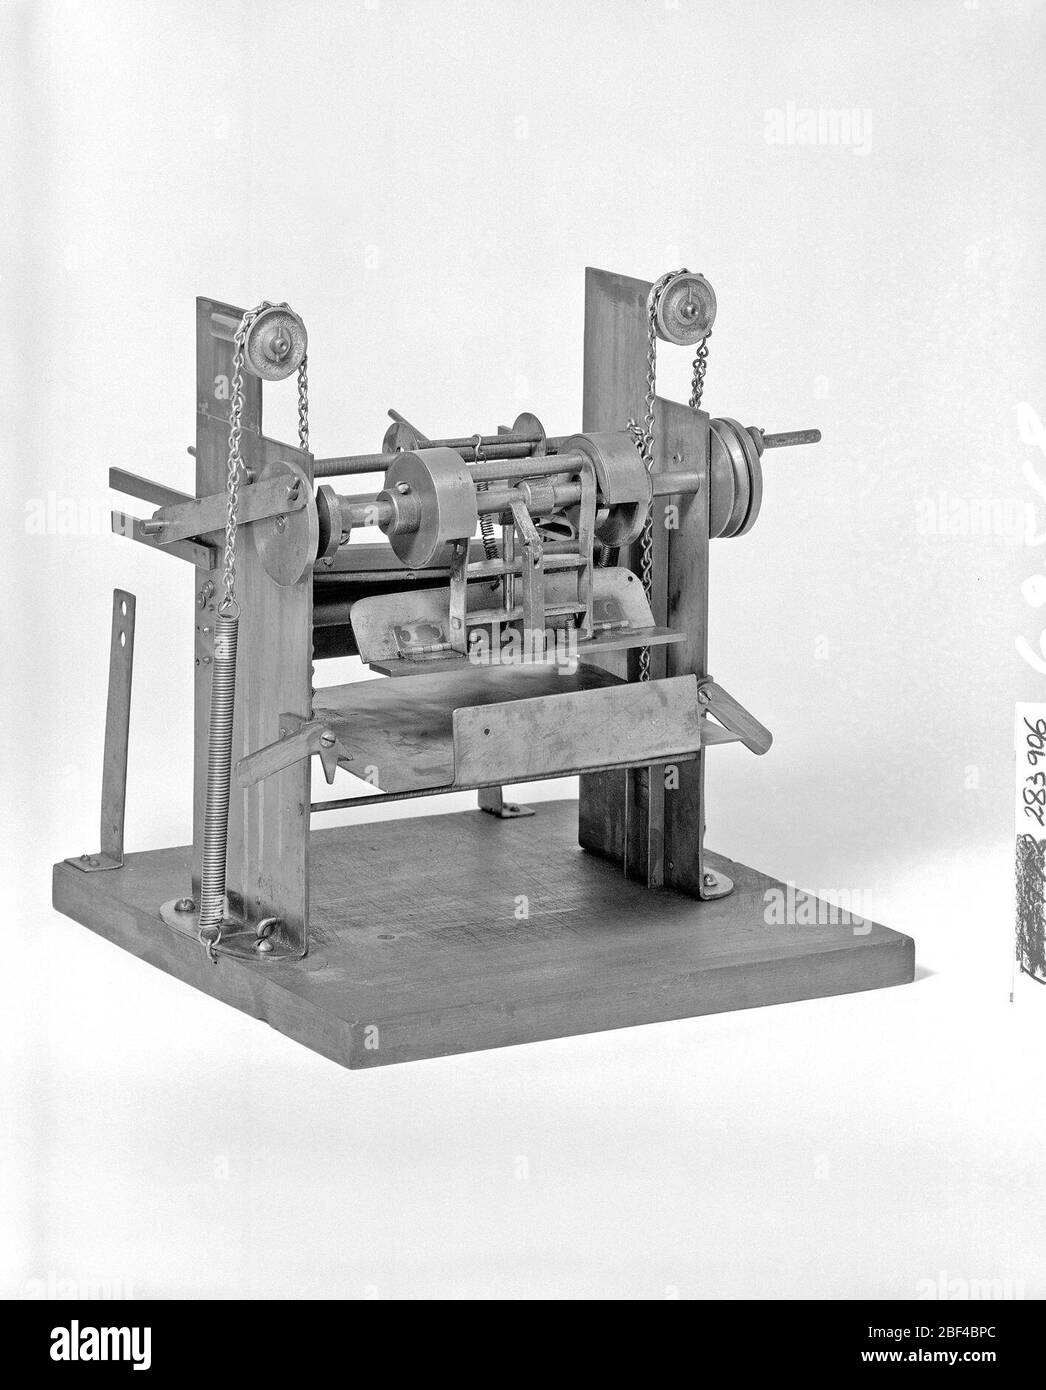 Patent Model of a Sheetfeeding Machine. This patent model demonstrates an invention for a sheet feeder for 'printing-presses, ruling-machines, paper box and bag machines, and analagous machines.” The invention was granted patent number 283906.Currently not on view Stock Photo